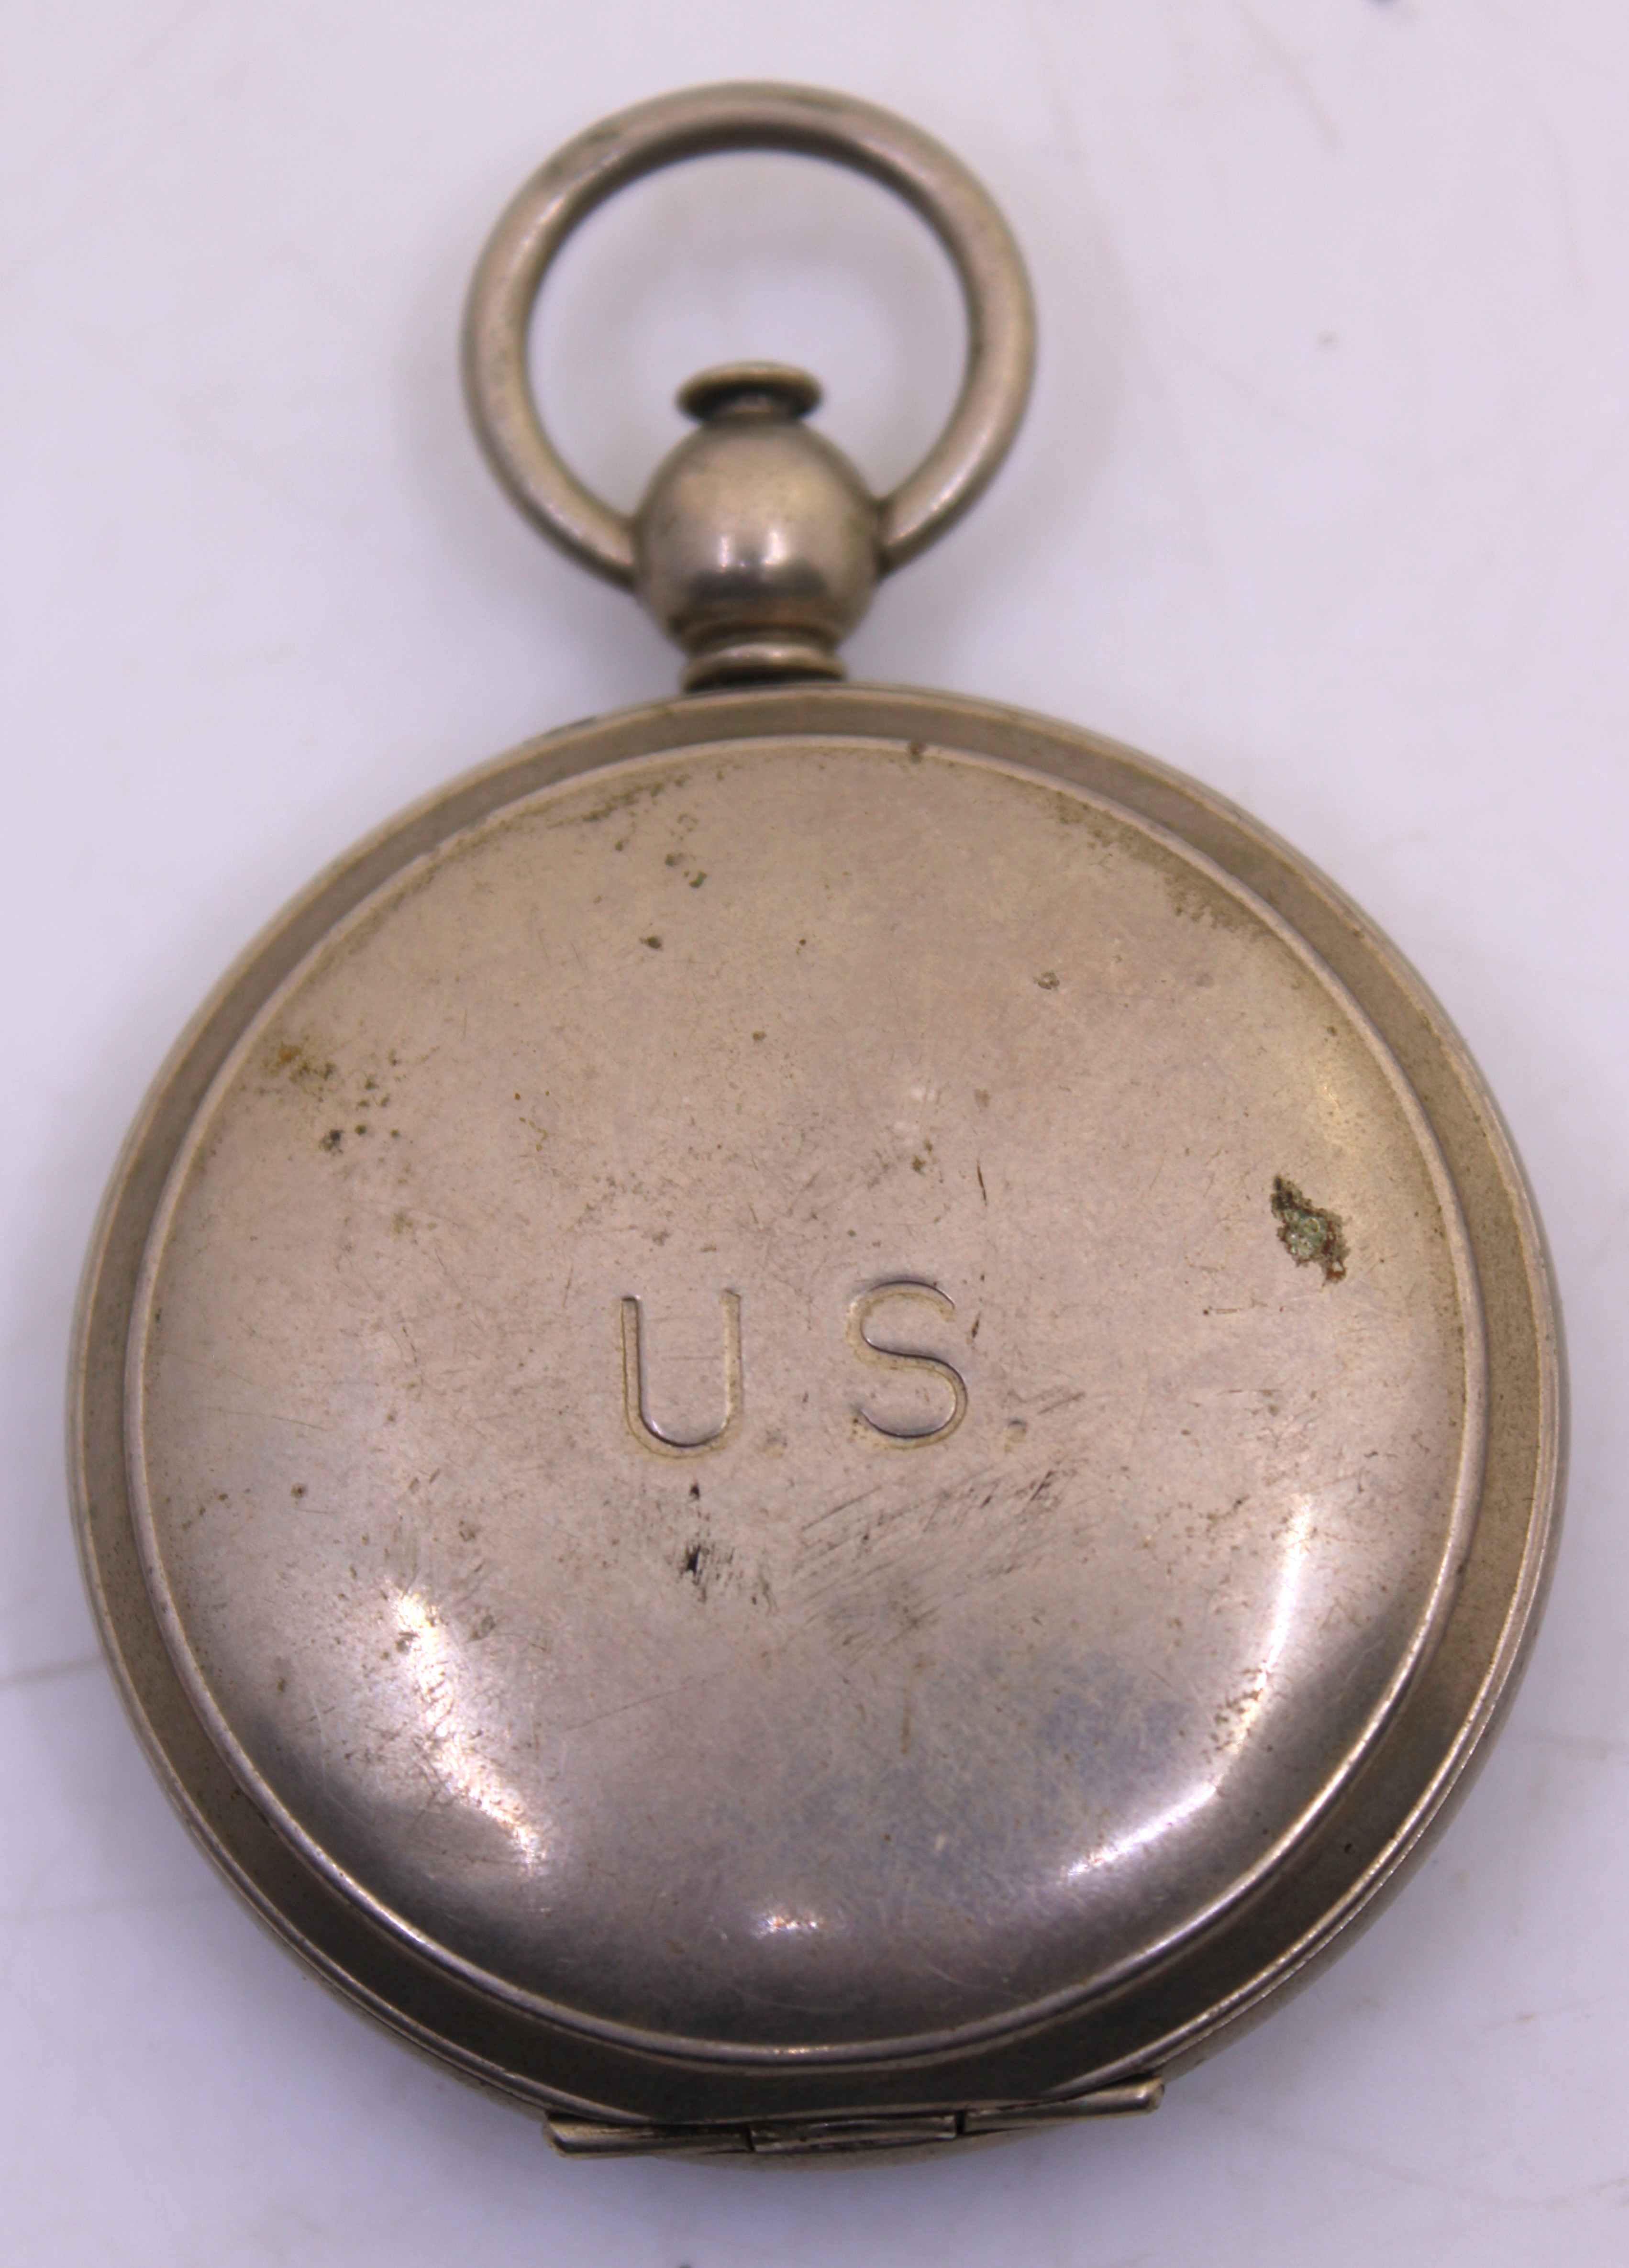 EPNS Vesta Case and Wittnauer Military Compass with "U.S." on the back.  The EPNS Vesta Case - Image 2 of 5